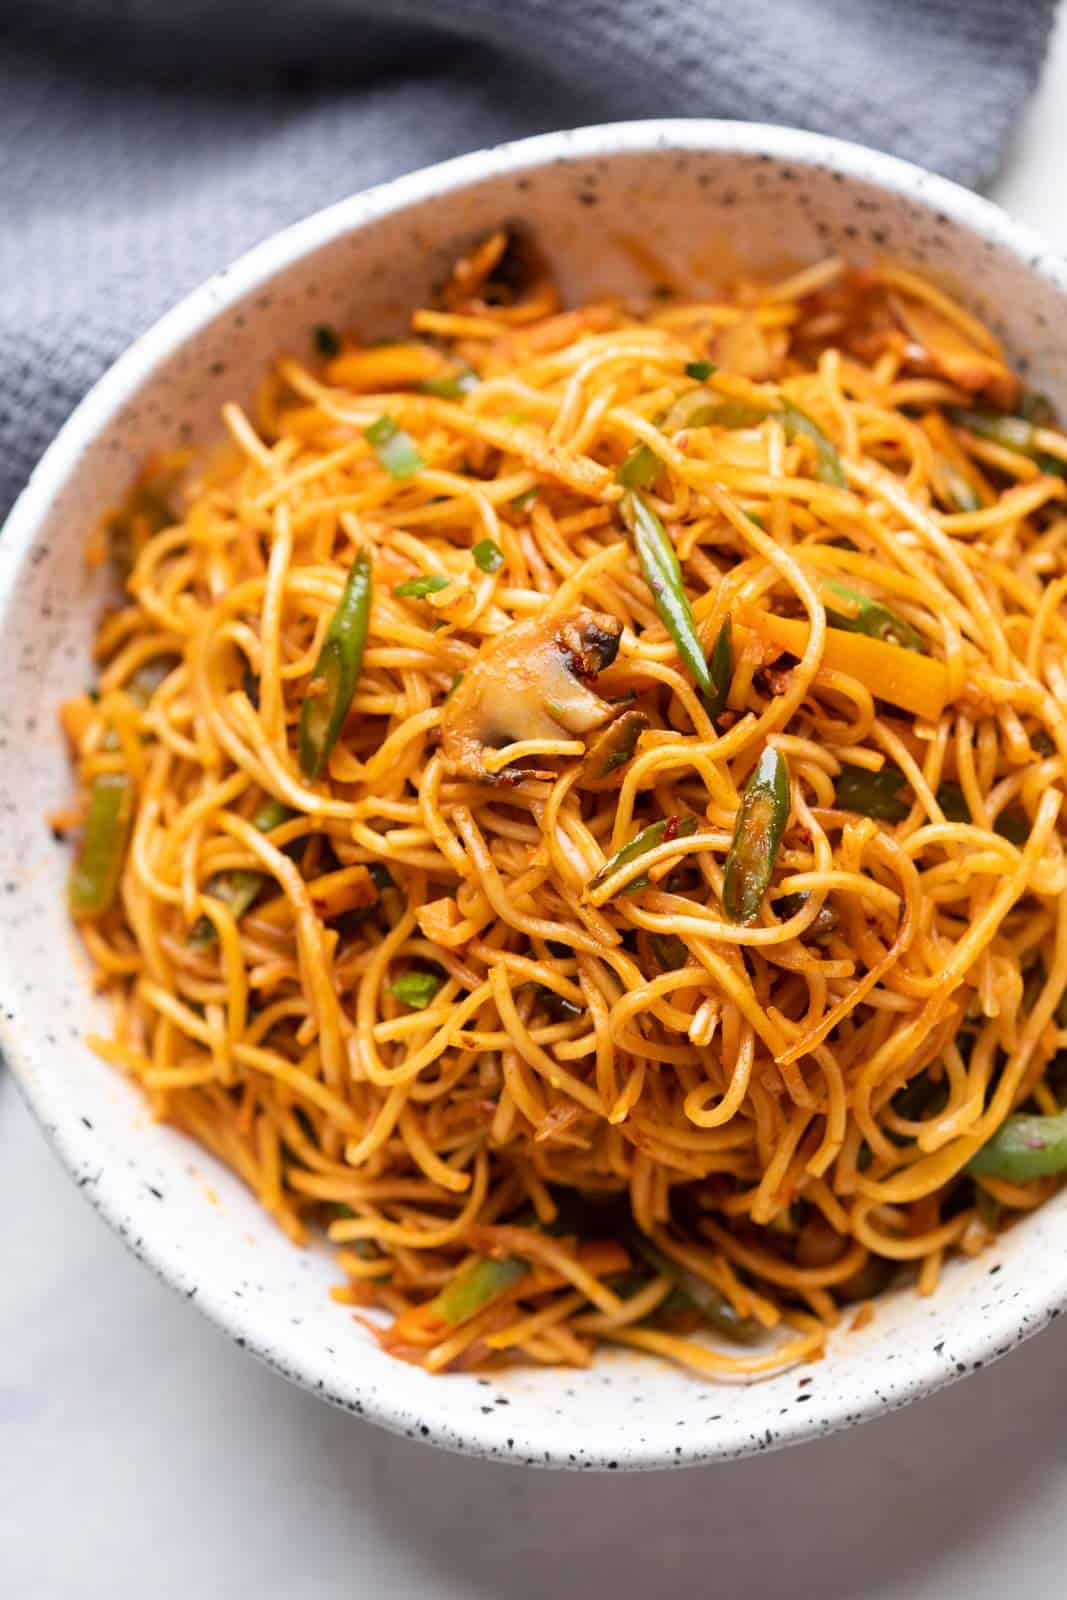 Chilli Garlic noodles served in a white textured bowl